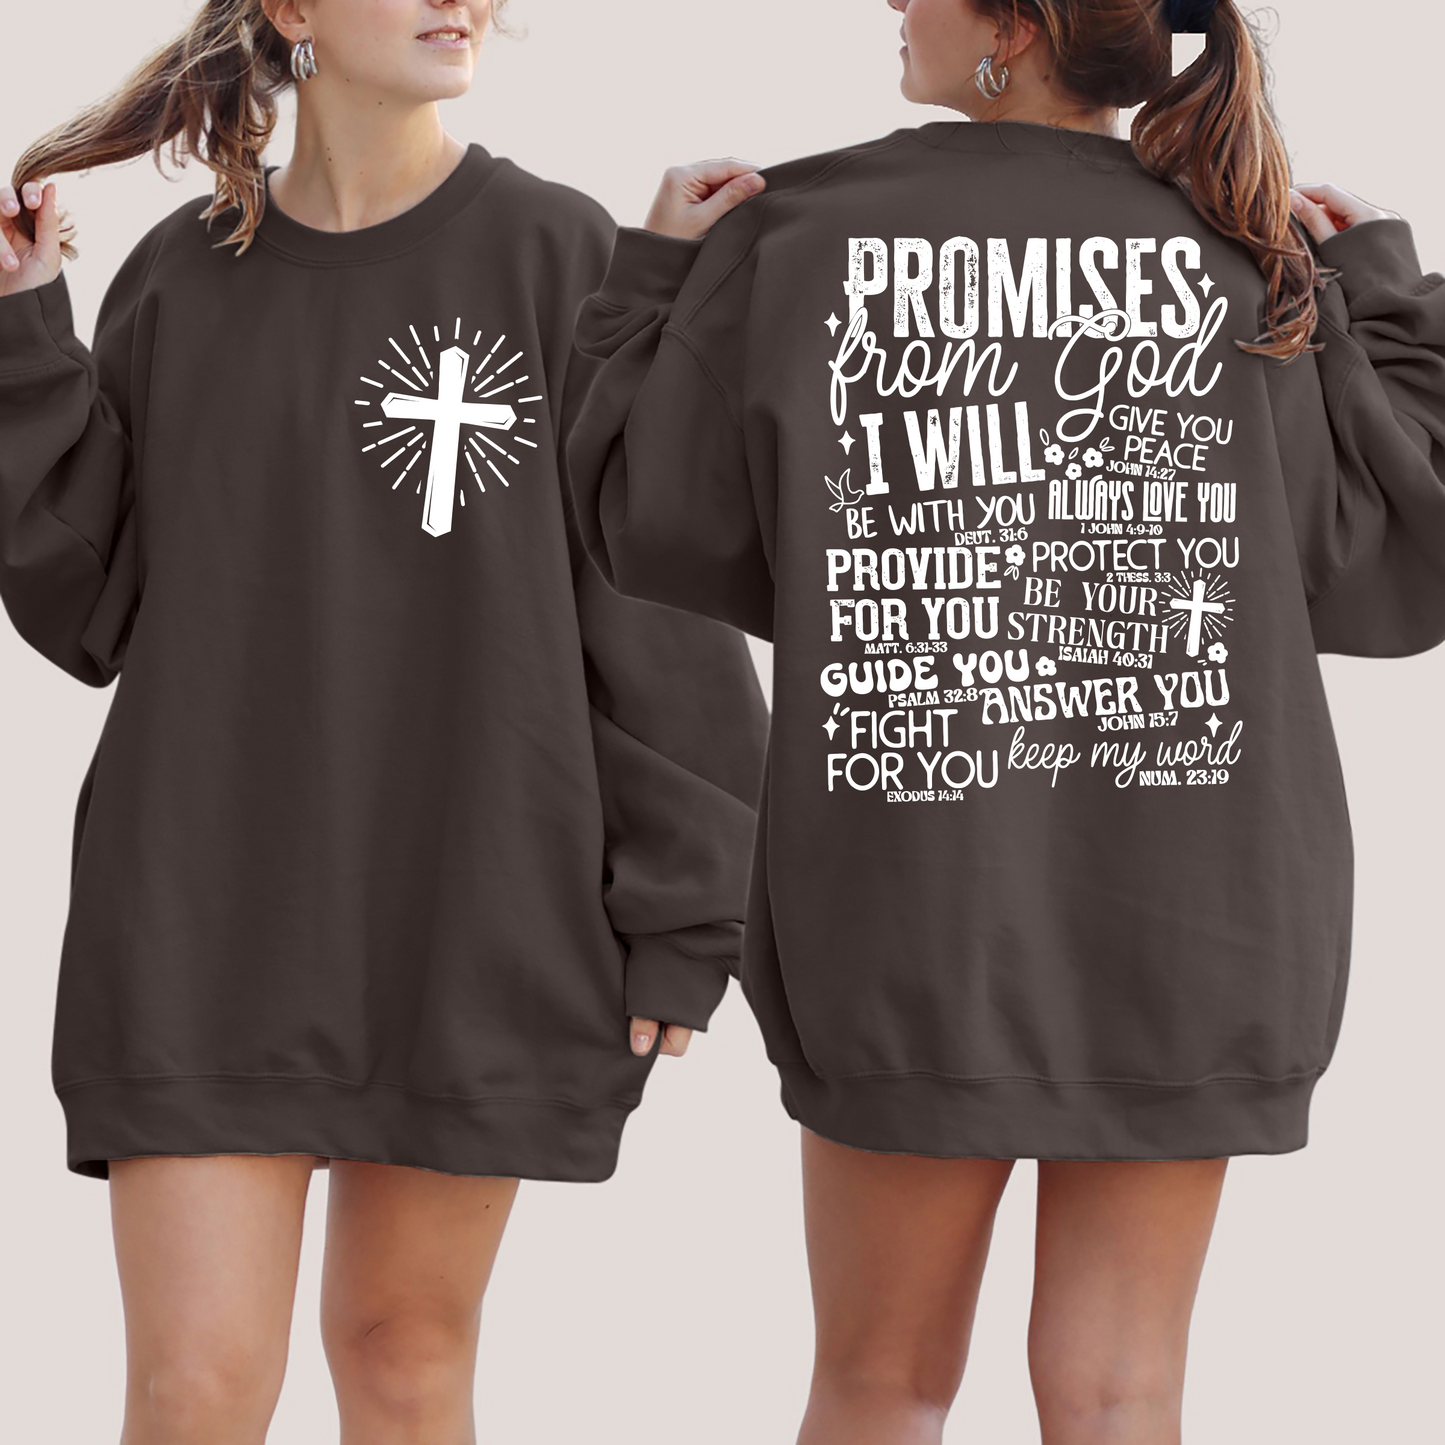 RTS Promises from GOD Cross SINGLE COLOR WHITE Screen Print transfers size ADULT FRONT 4X5 BACK 10X12